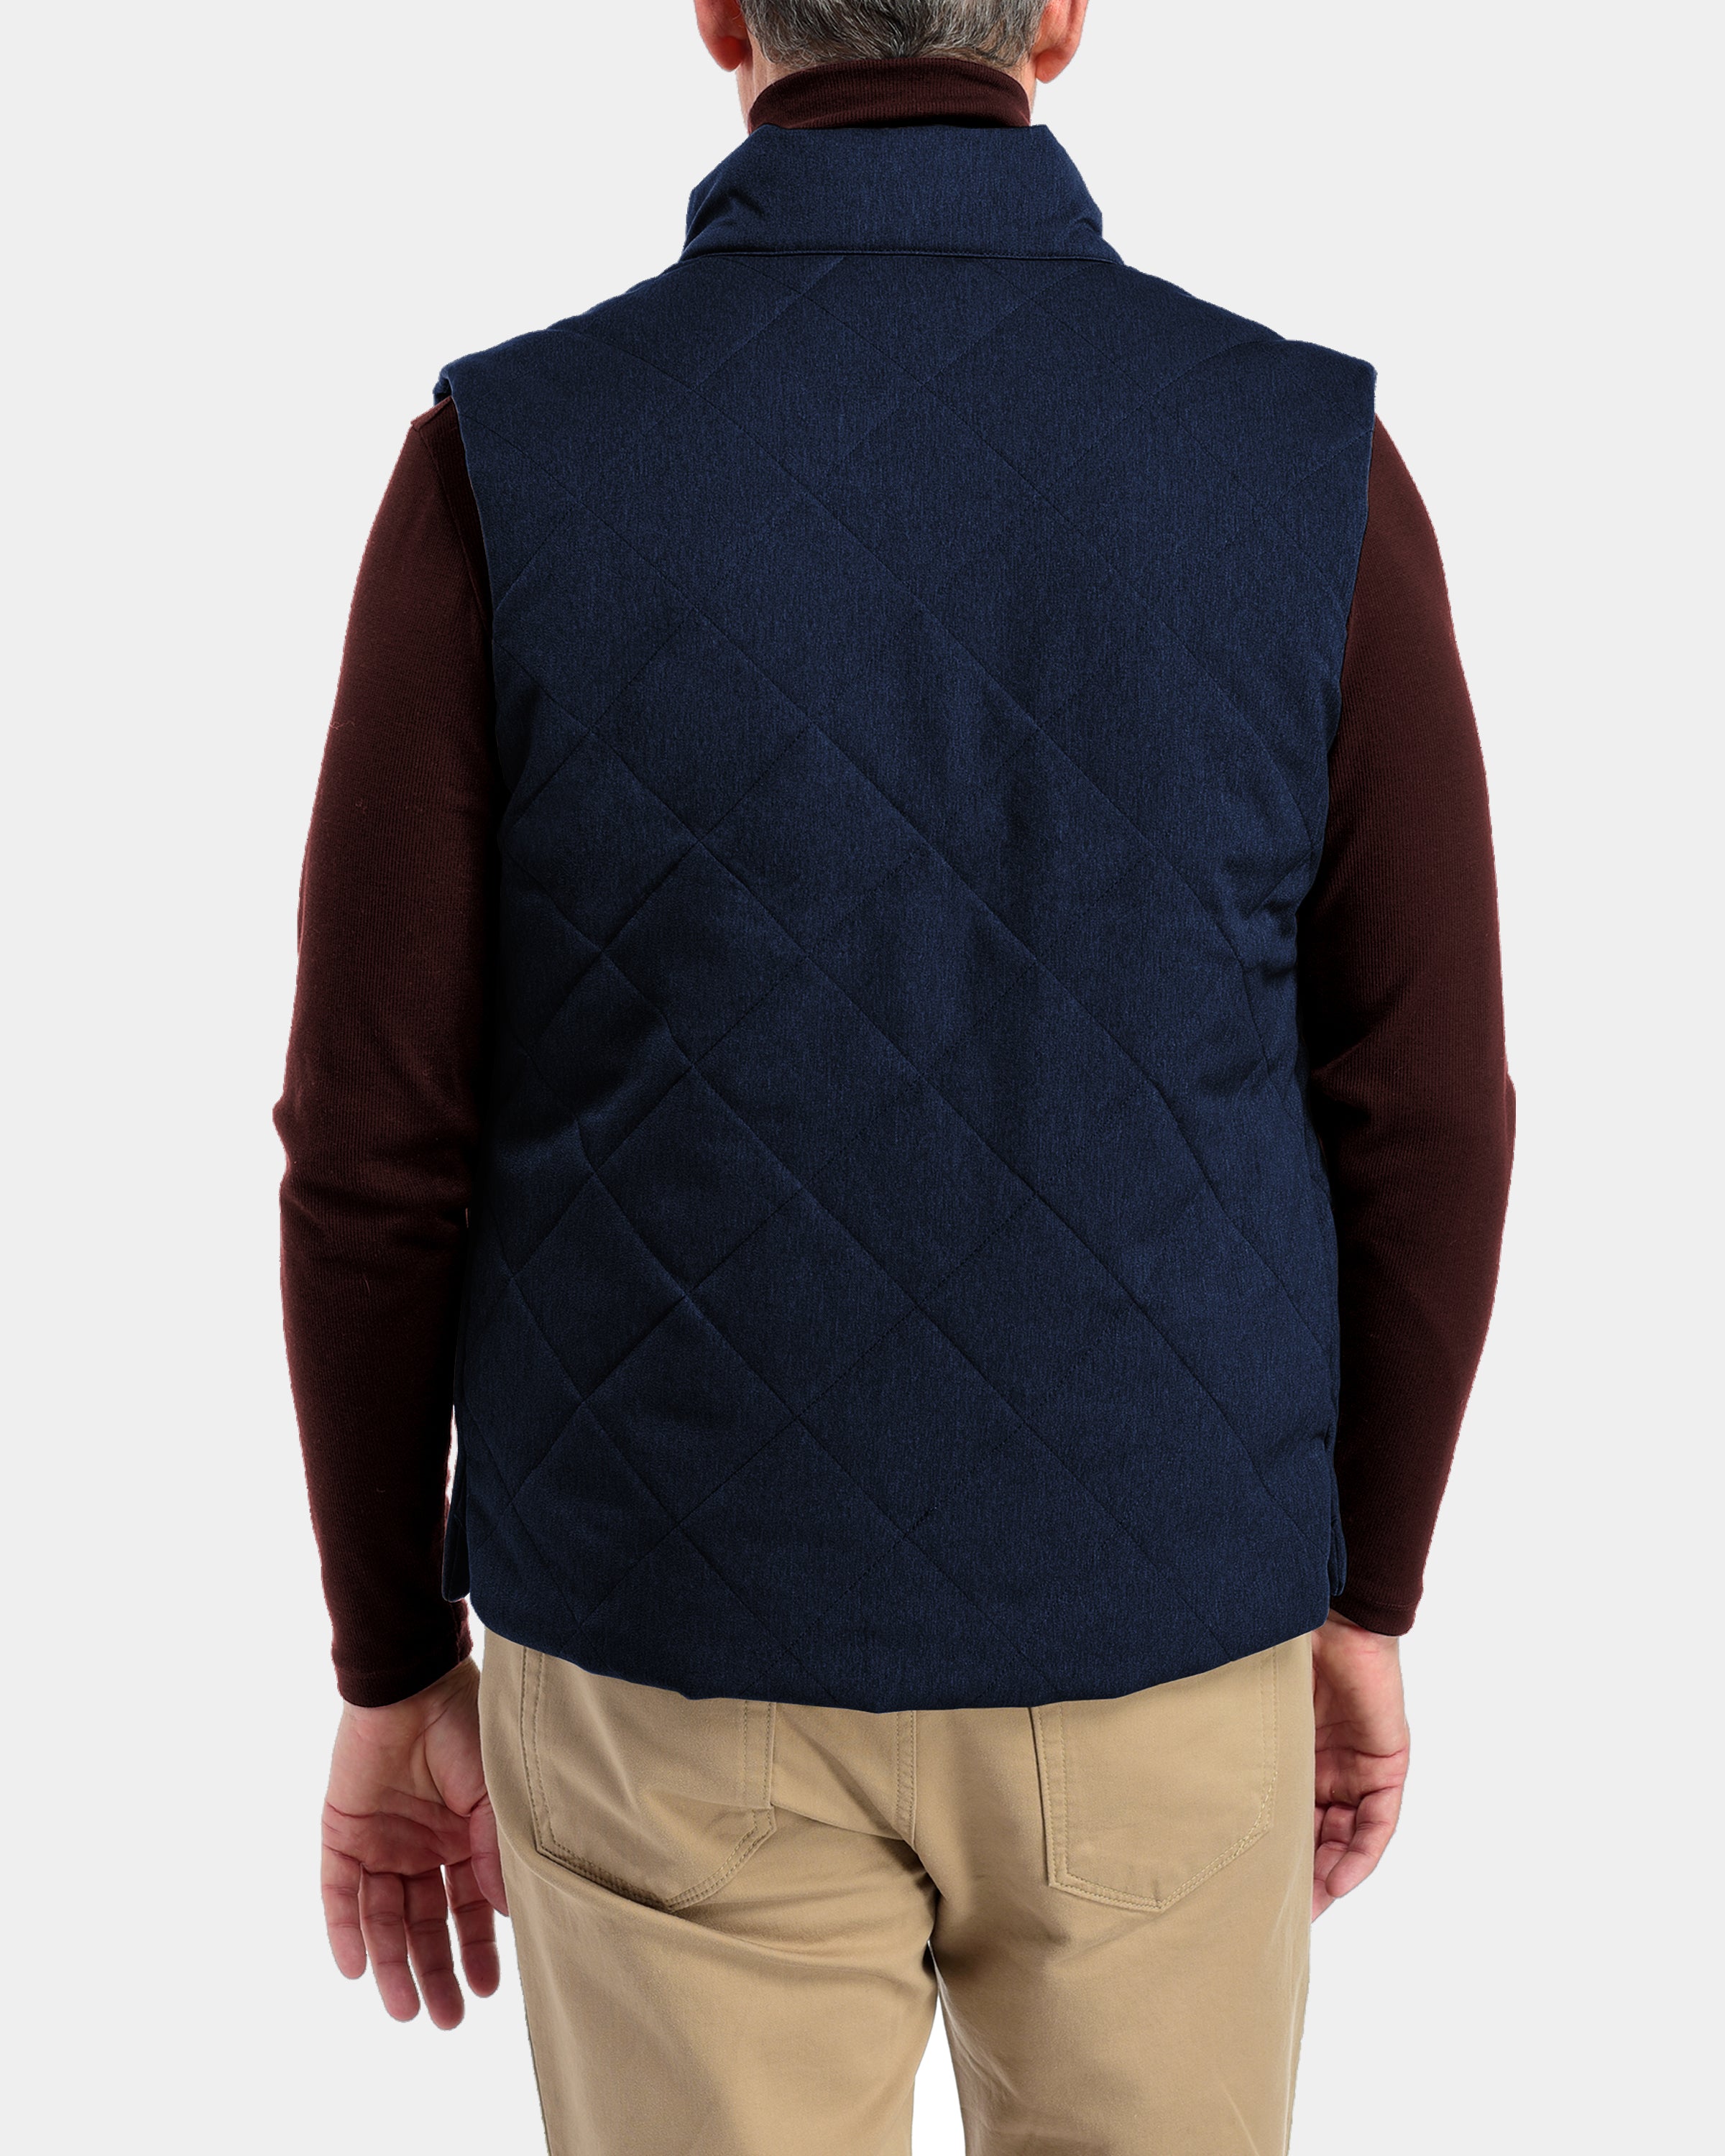 JCrew Men's Sussex Quilted Vest Insulated Outerwear 35919 $138 Vintage Navy  XS